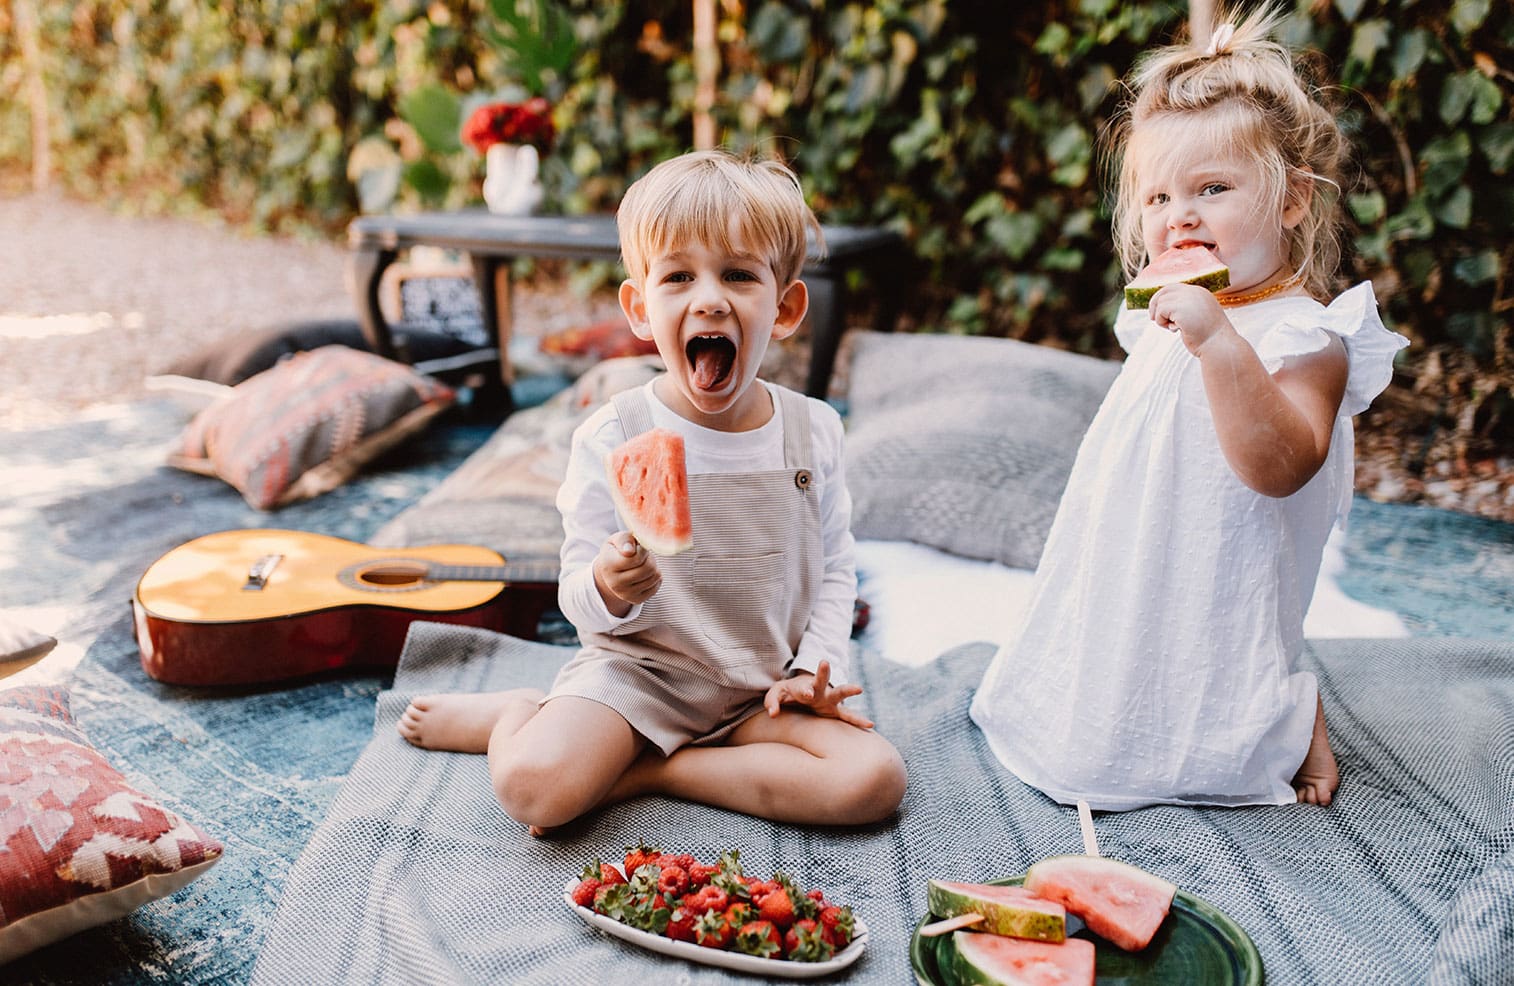 The summer break can bring all kinds of parenting challenges. Here's a few ideas for how you can survive summer with energetic kids, and have a fun time too